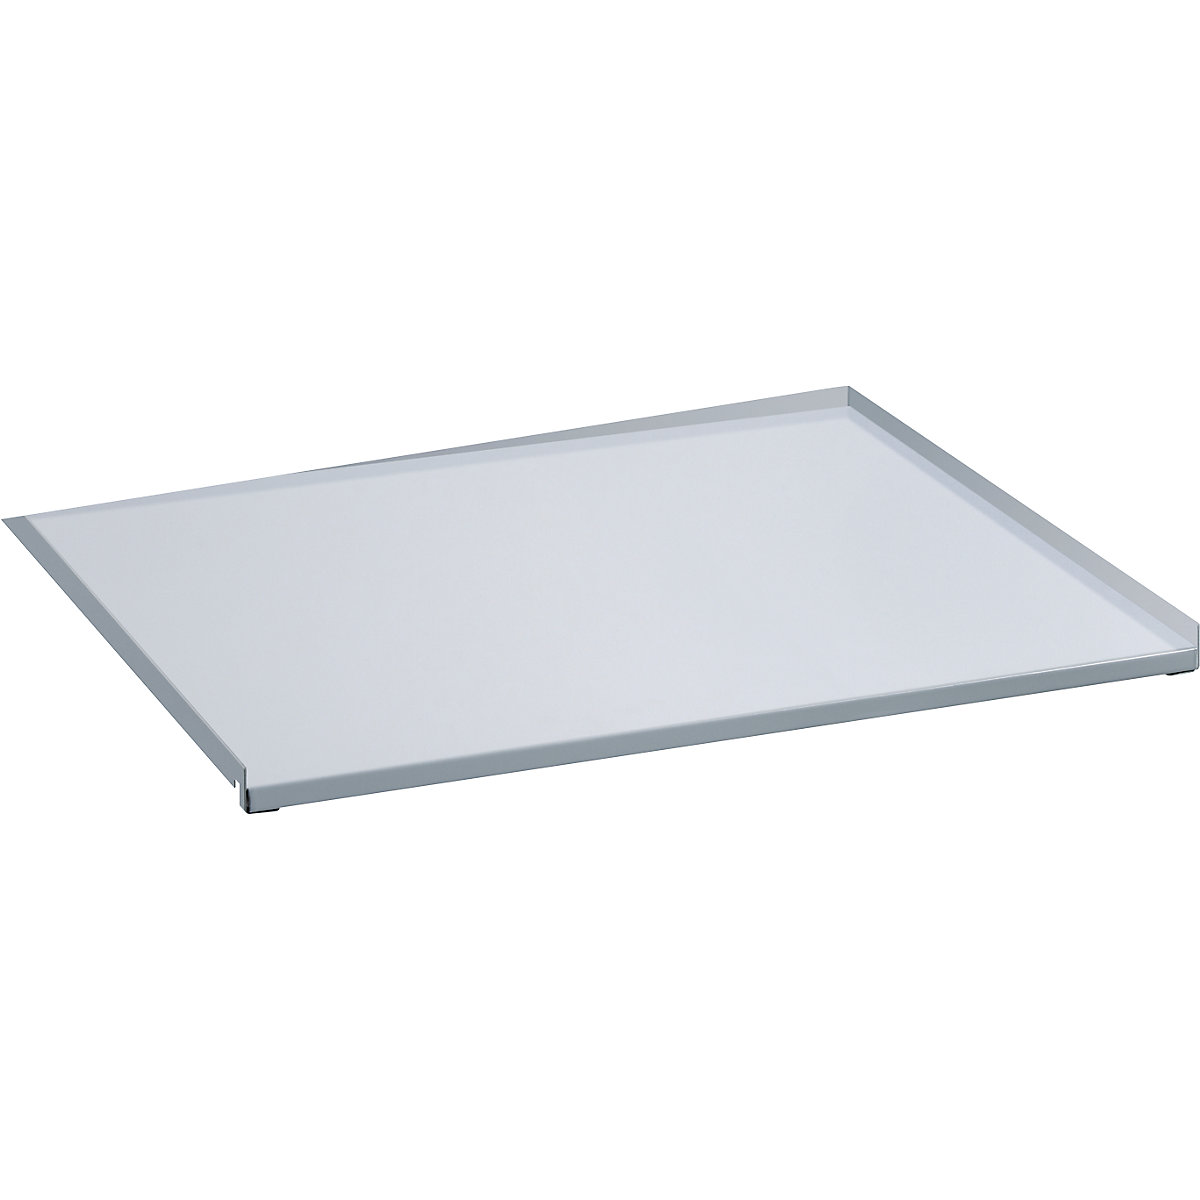 Sheet metal cover for extension frame – LISTA, partial extension, for WxD 890 x 860 mm, light grey